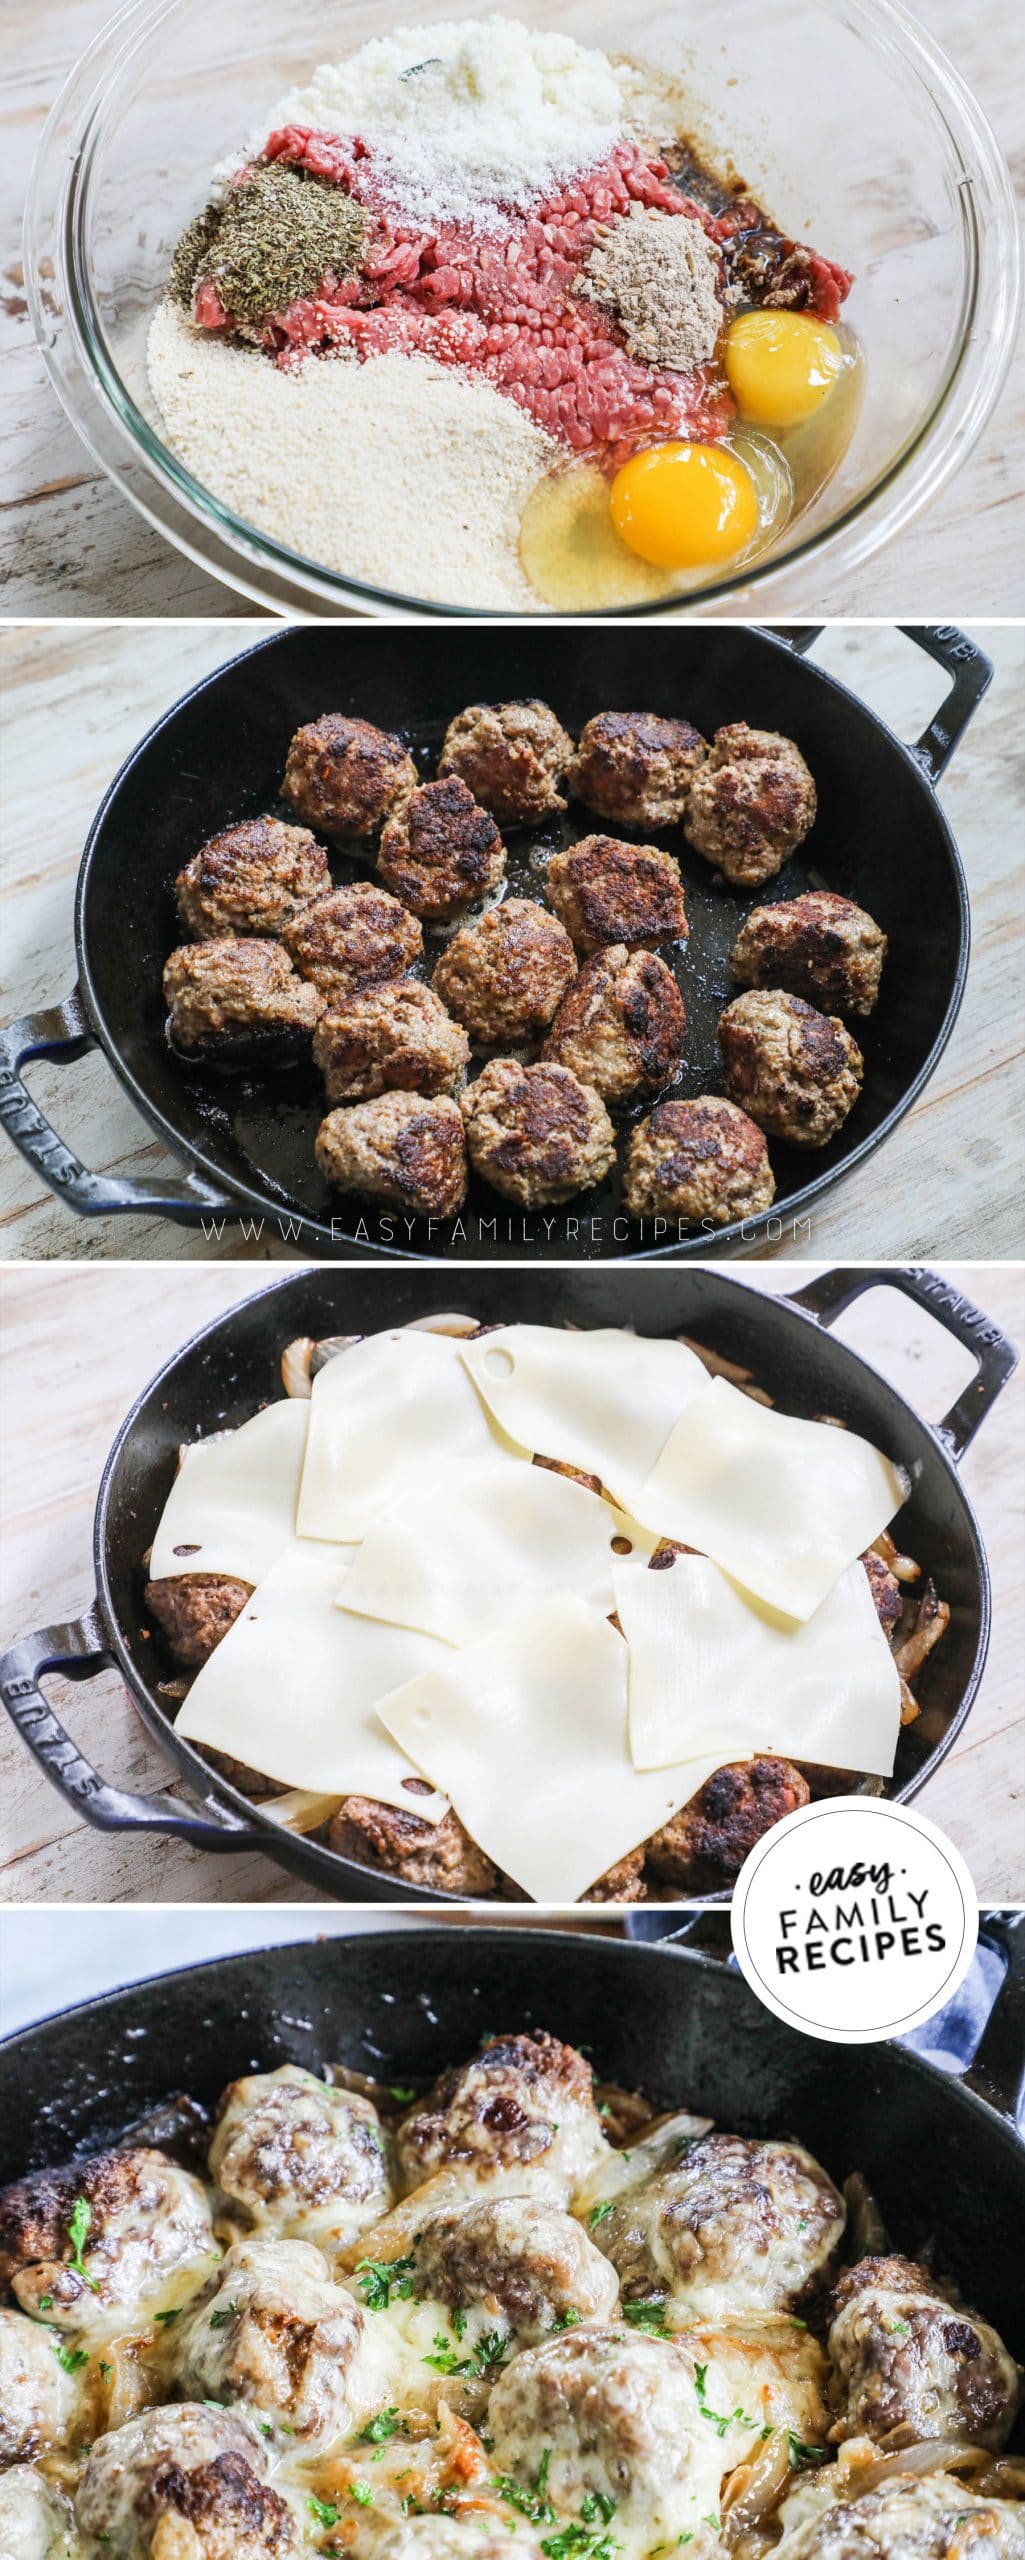 How to make French Onion Meatballs- 1. Combine ingredients for meatballs. 2. Cook beef meatballs in a skillet. 3. Sautee onions add meatballs and cheese. 4. Garnish with fresh parsley.